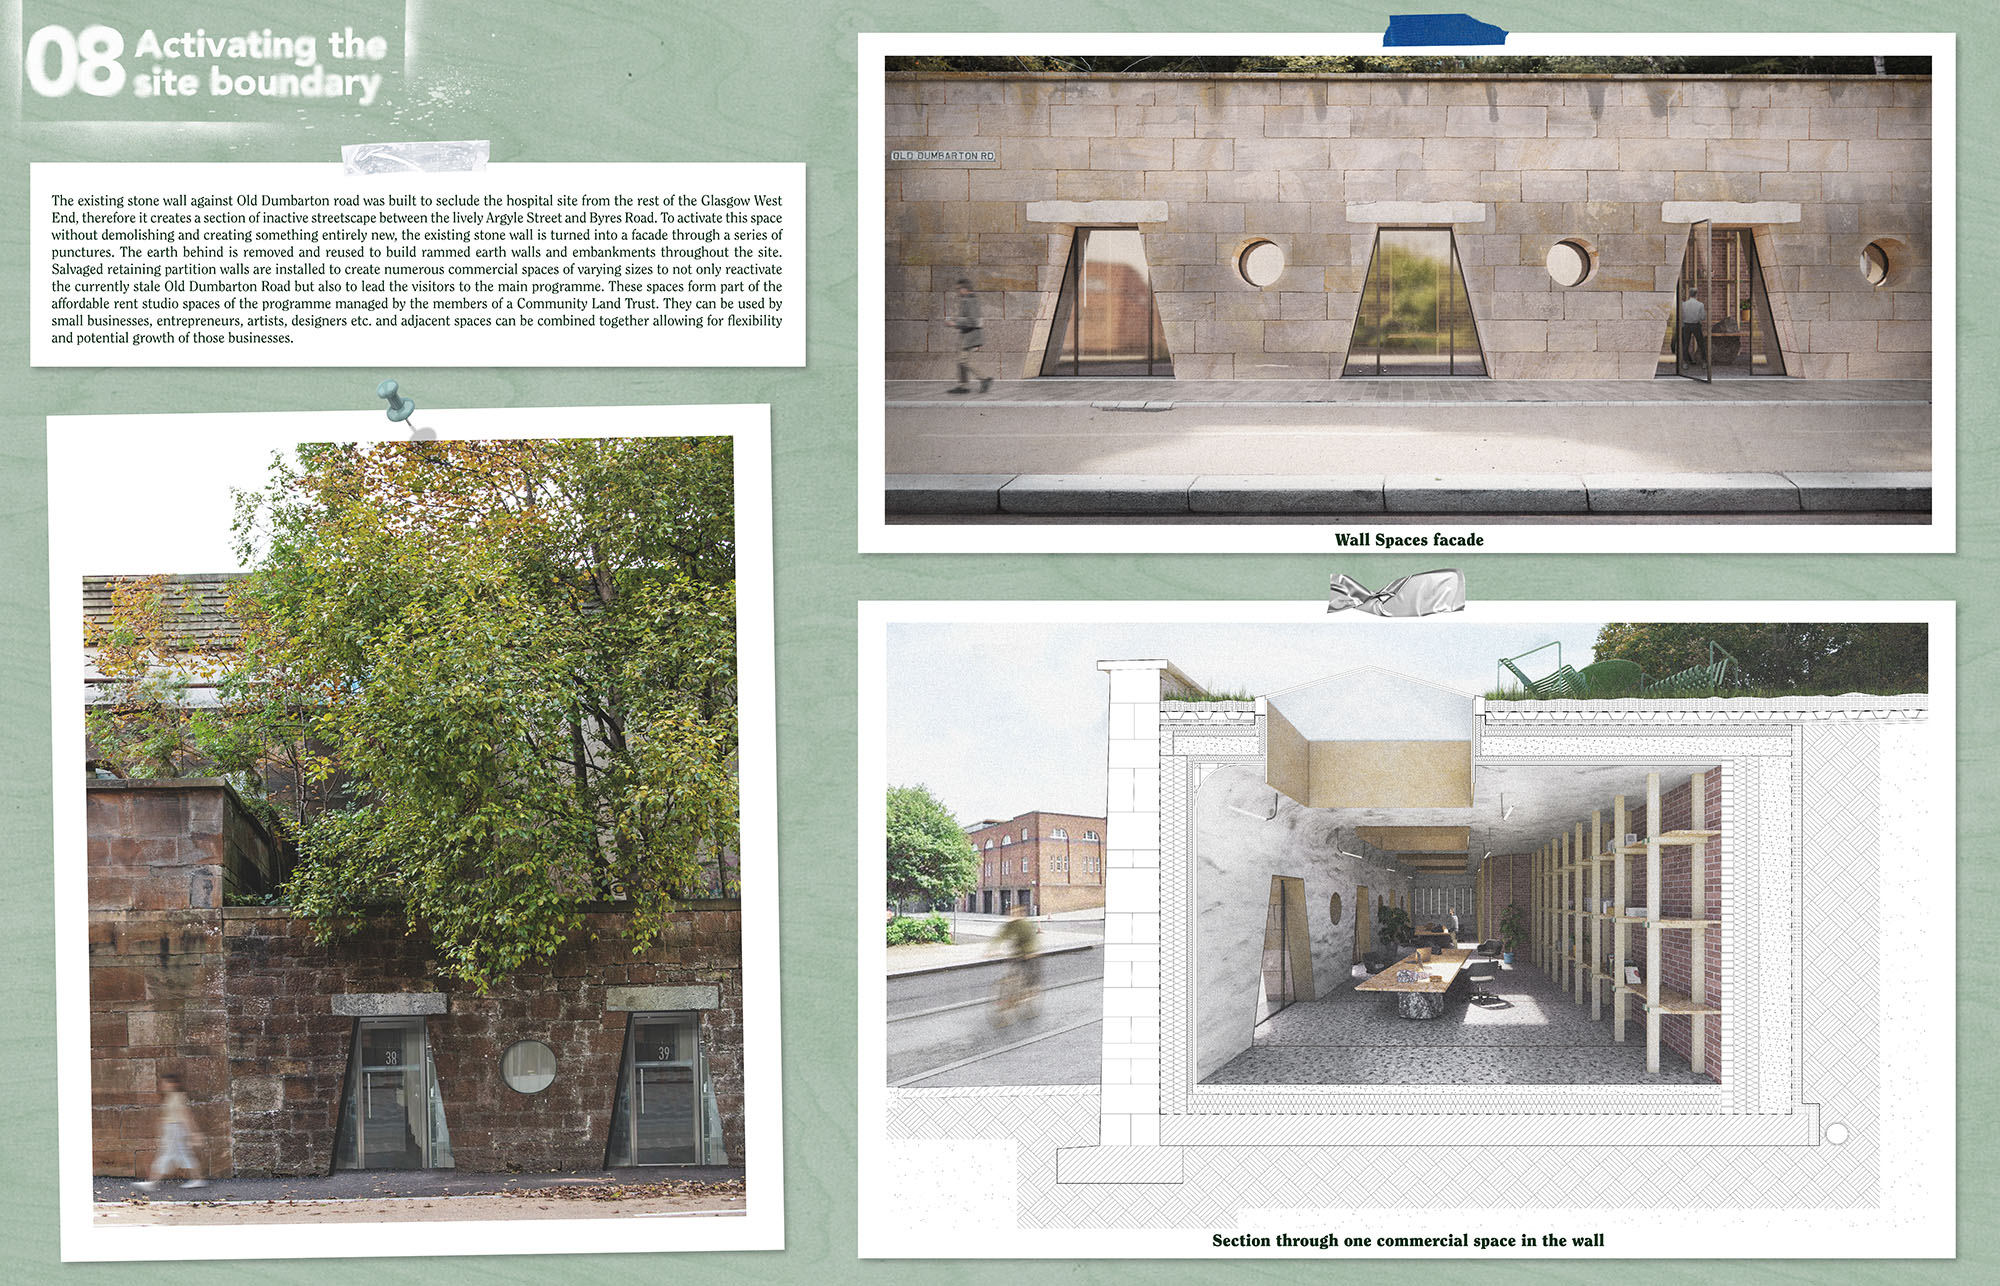 Page 8 of Karlis Kukainis winning entry to the A&DS and RIAS Scottish Student Award. The board includes an image of an external brick wall with glass doors leading into the building, and wall space face and a section into a commercial space.